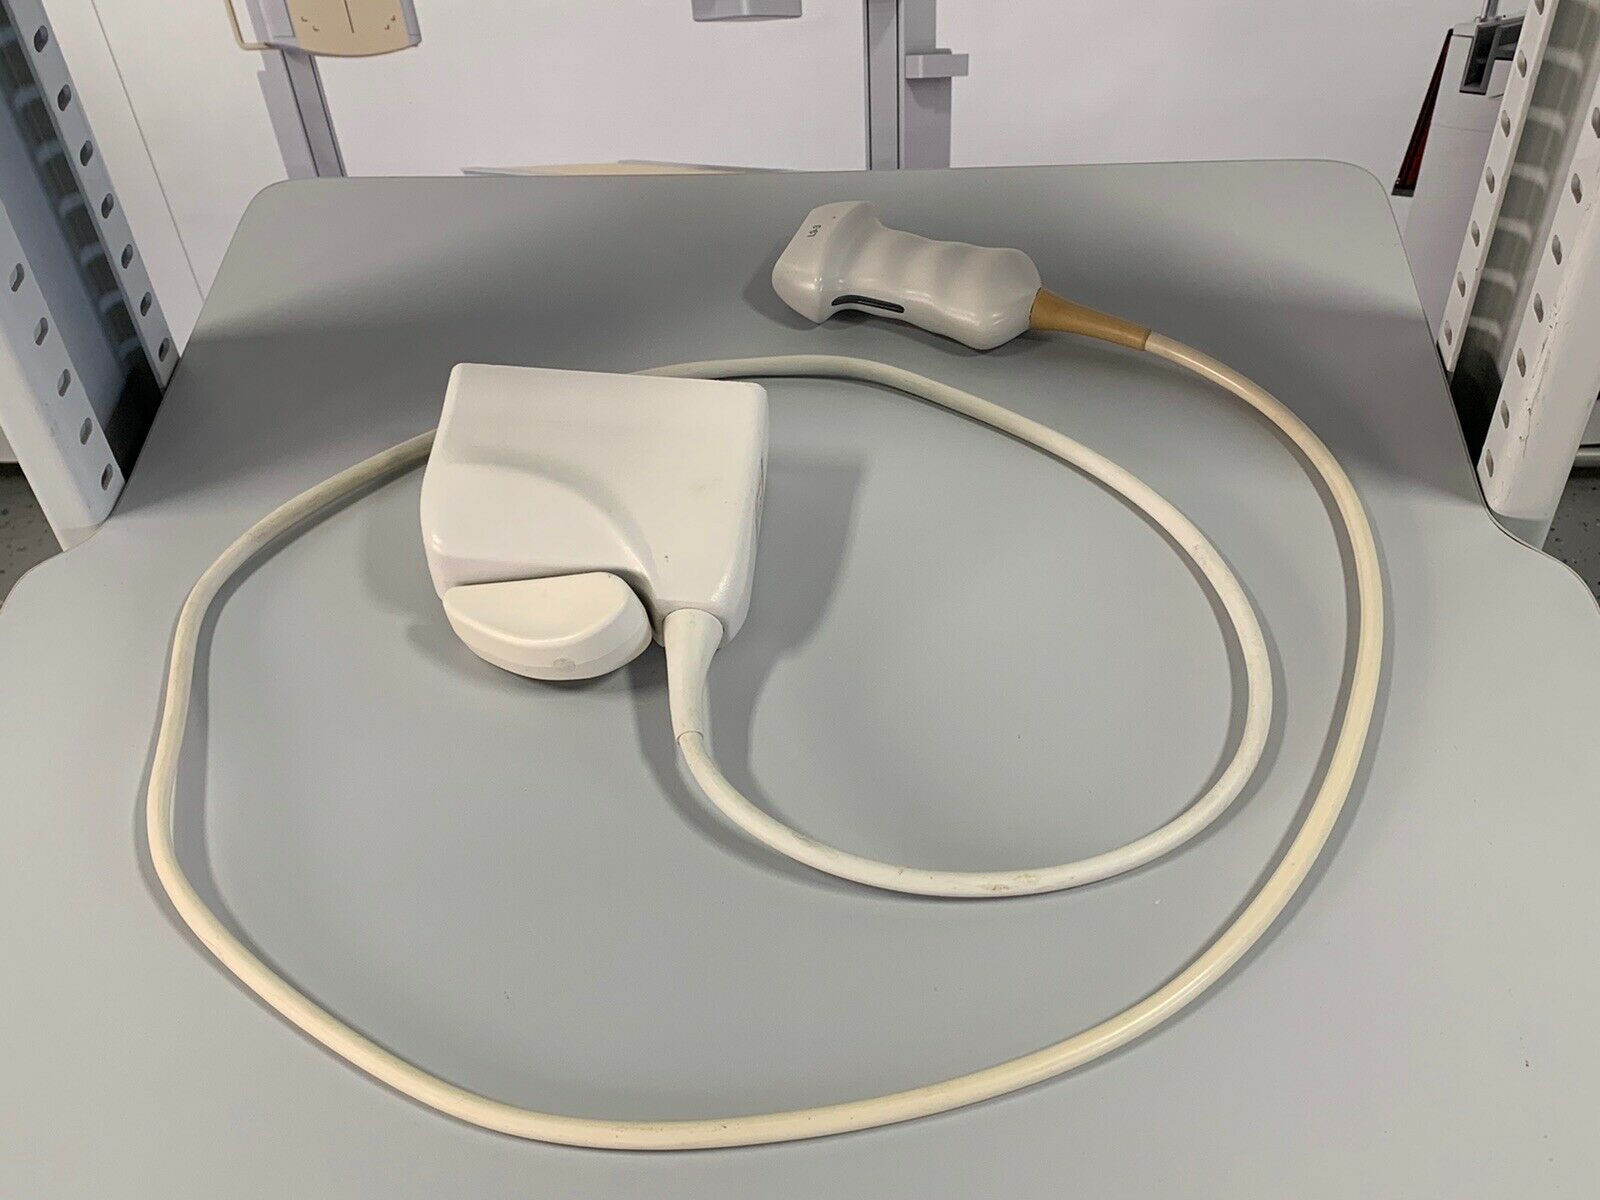 PHILIPS ULTRASOUND TRANSDUCER L9-3 PROBE, REMOVED FROM PHILIPS IU22 DIAGNOSTIC ULTRASOUND MACHINES FOR SALE